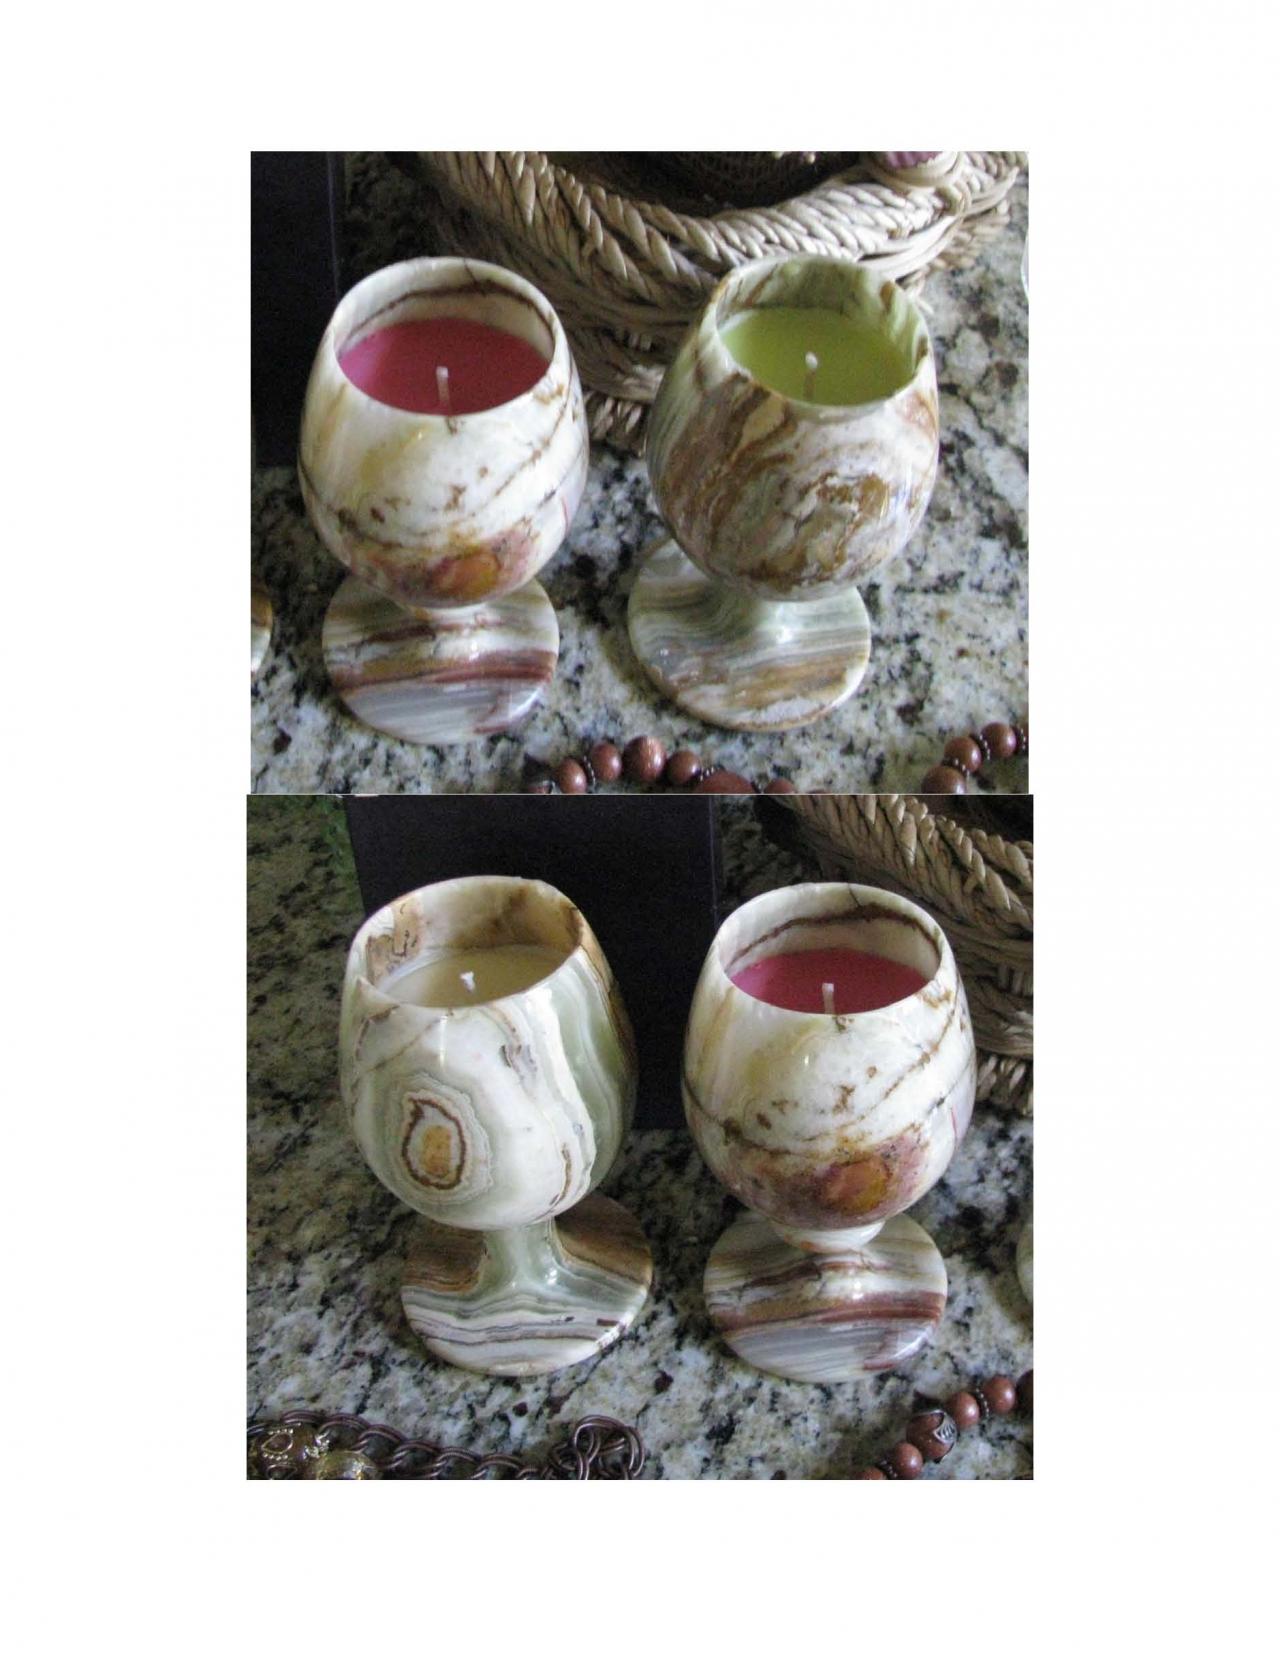 Save On 4 Very Unique Handcrafted Highly Scented Candle 6 Oz Genuine Marble Wine Goblet Your Choice Of Honey Scents